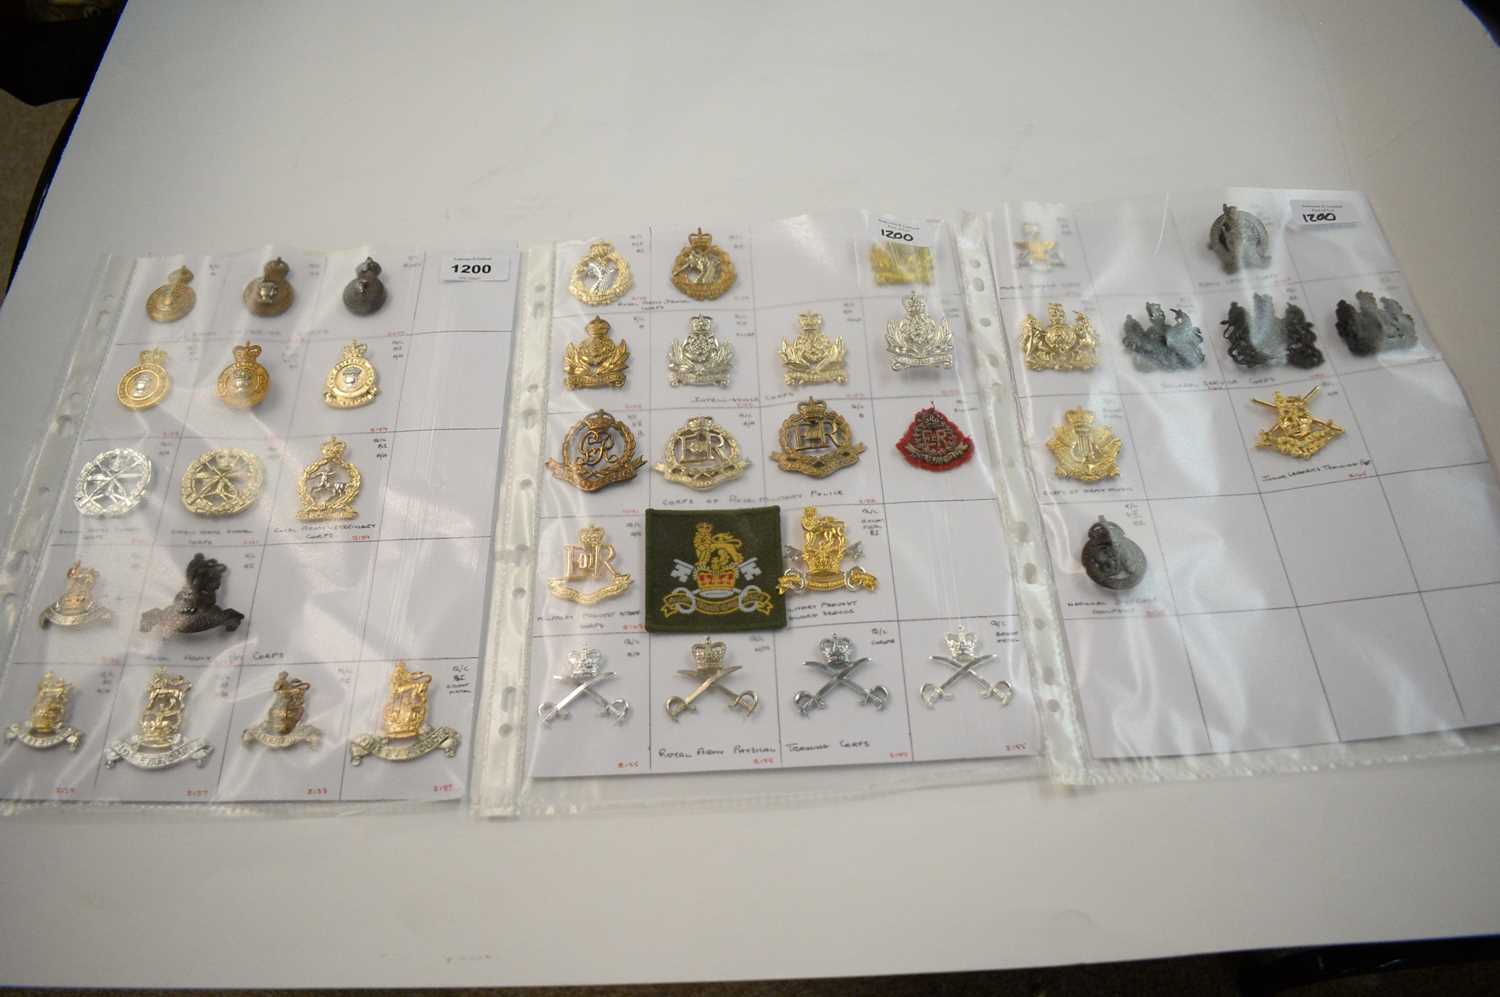 Lot 1200 - A collection of 43 British cap badges.